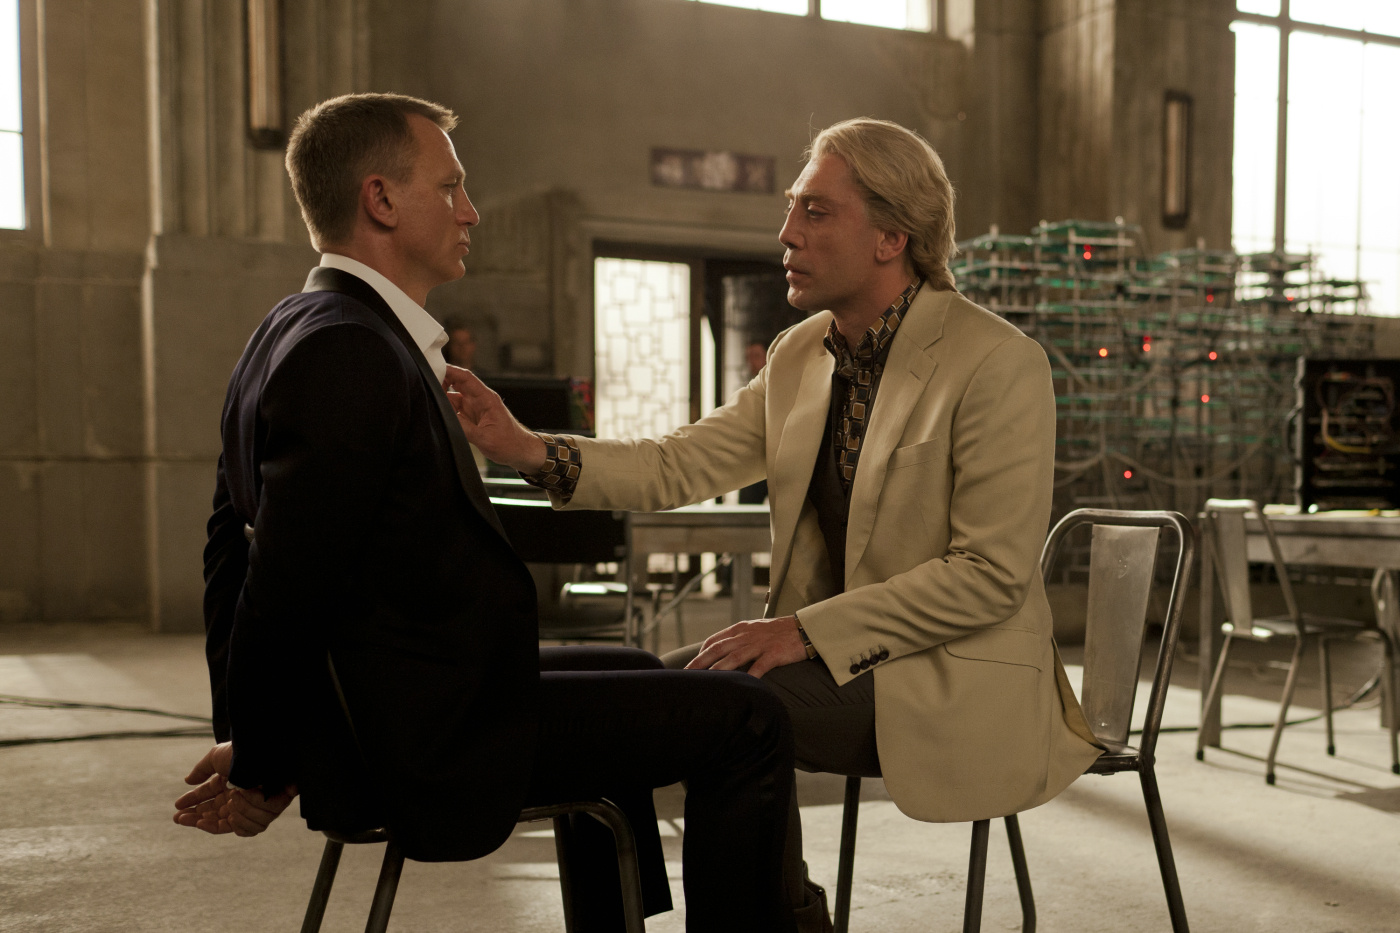 Raoul Silva and James Bond in "Skyfall"